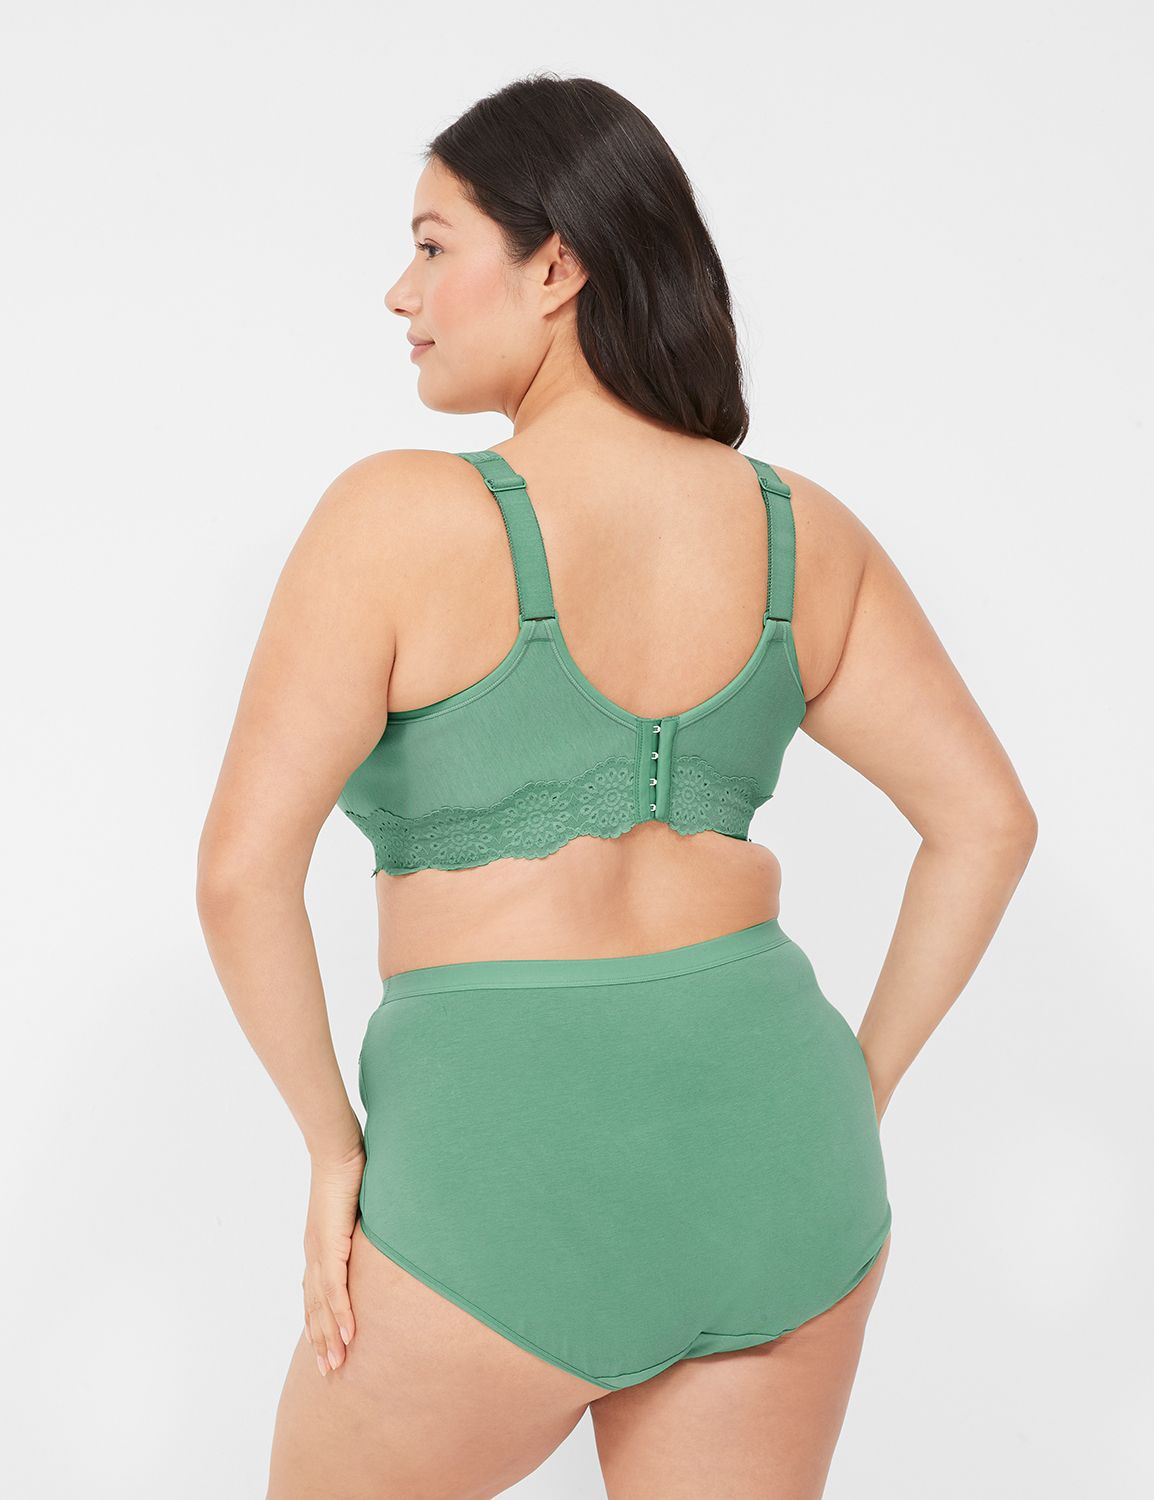 ▷ Cacique green bra with lace sides, women's size 42DD